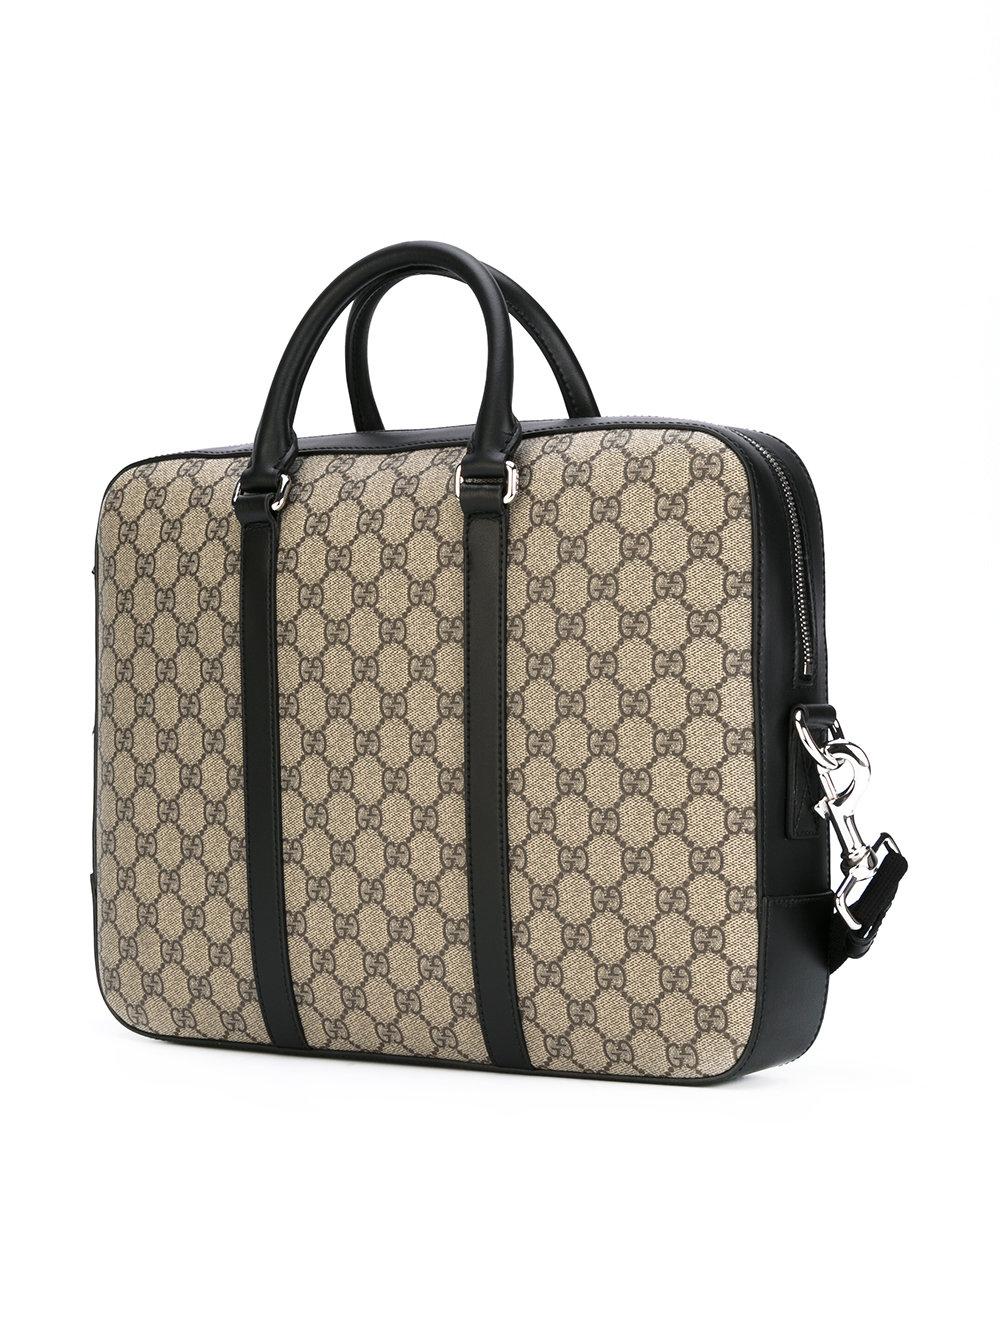 Gucci Leather Gg Supreme Laptop Bag in Black - Lyst